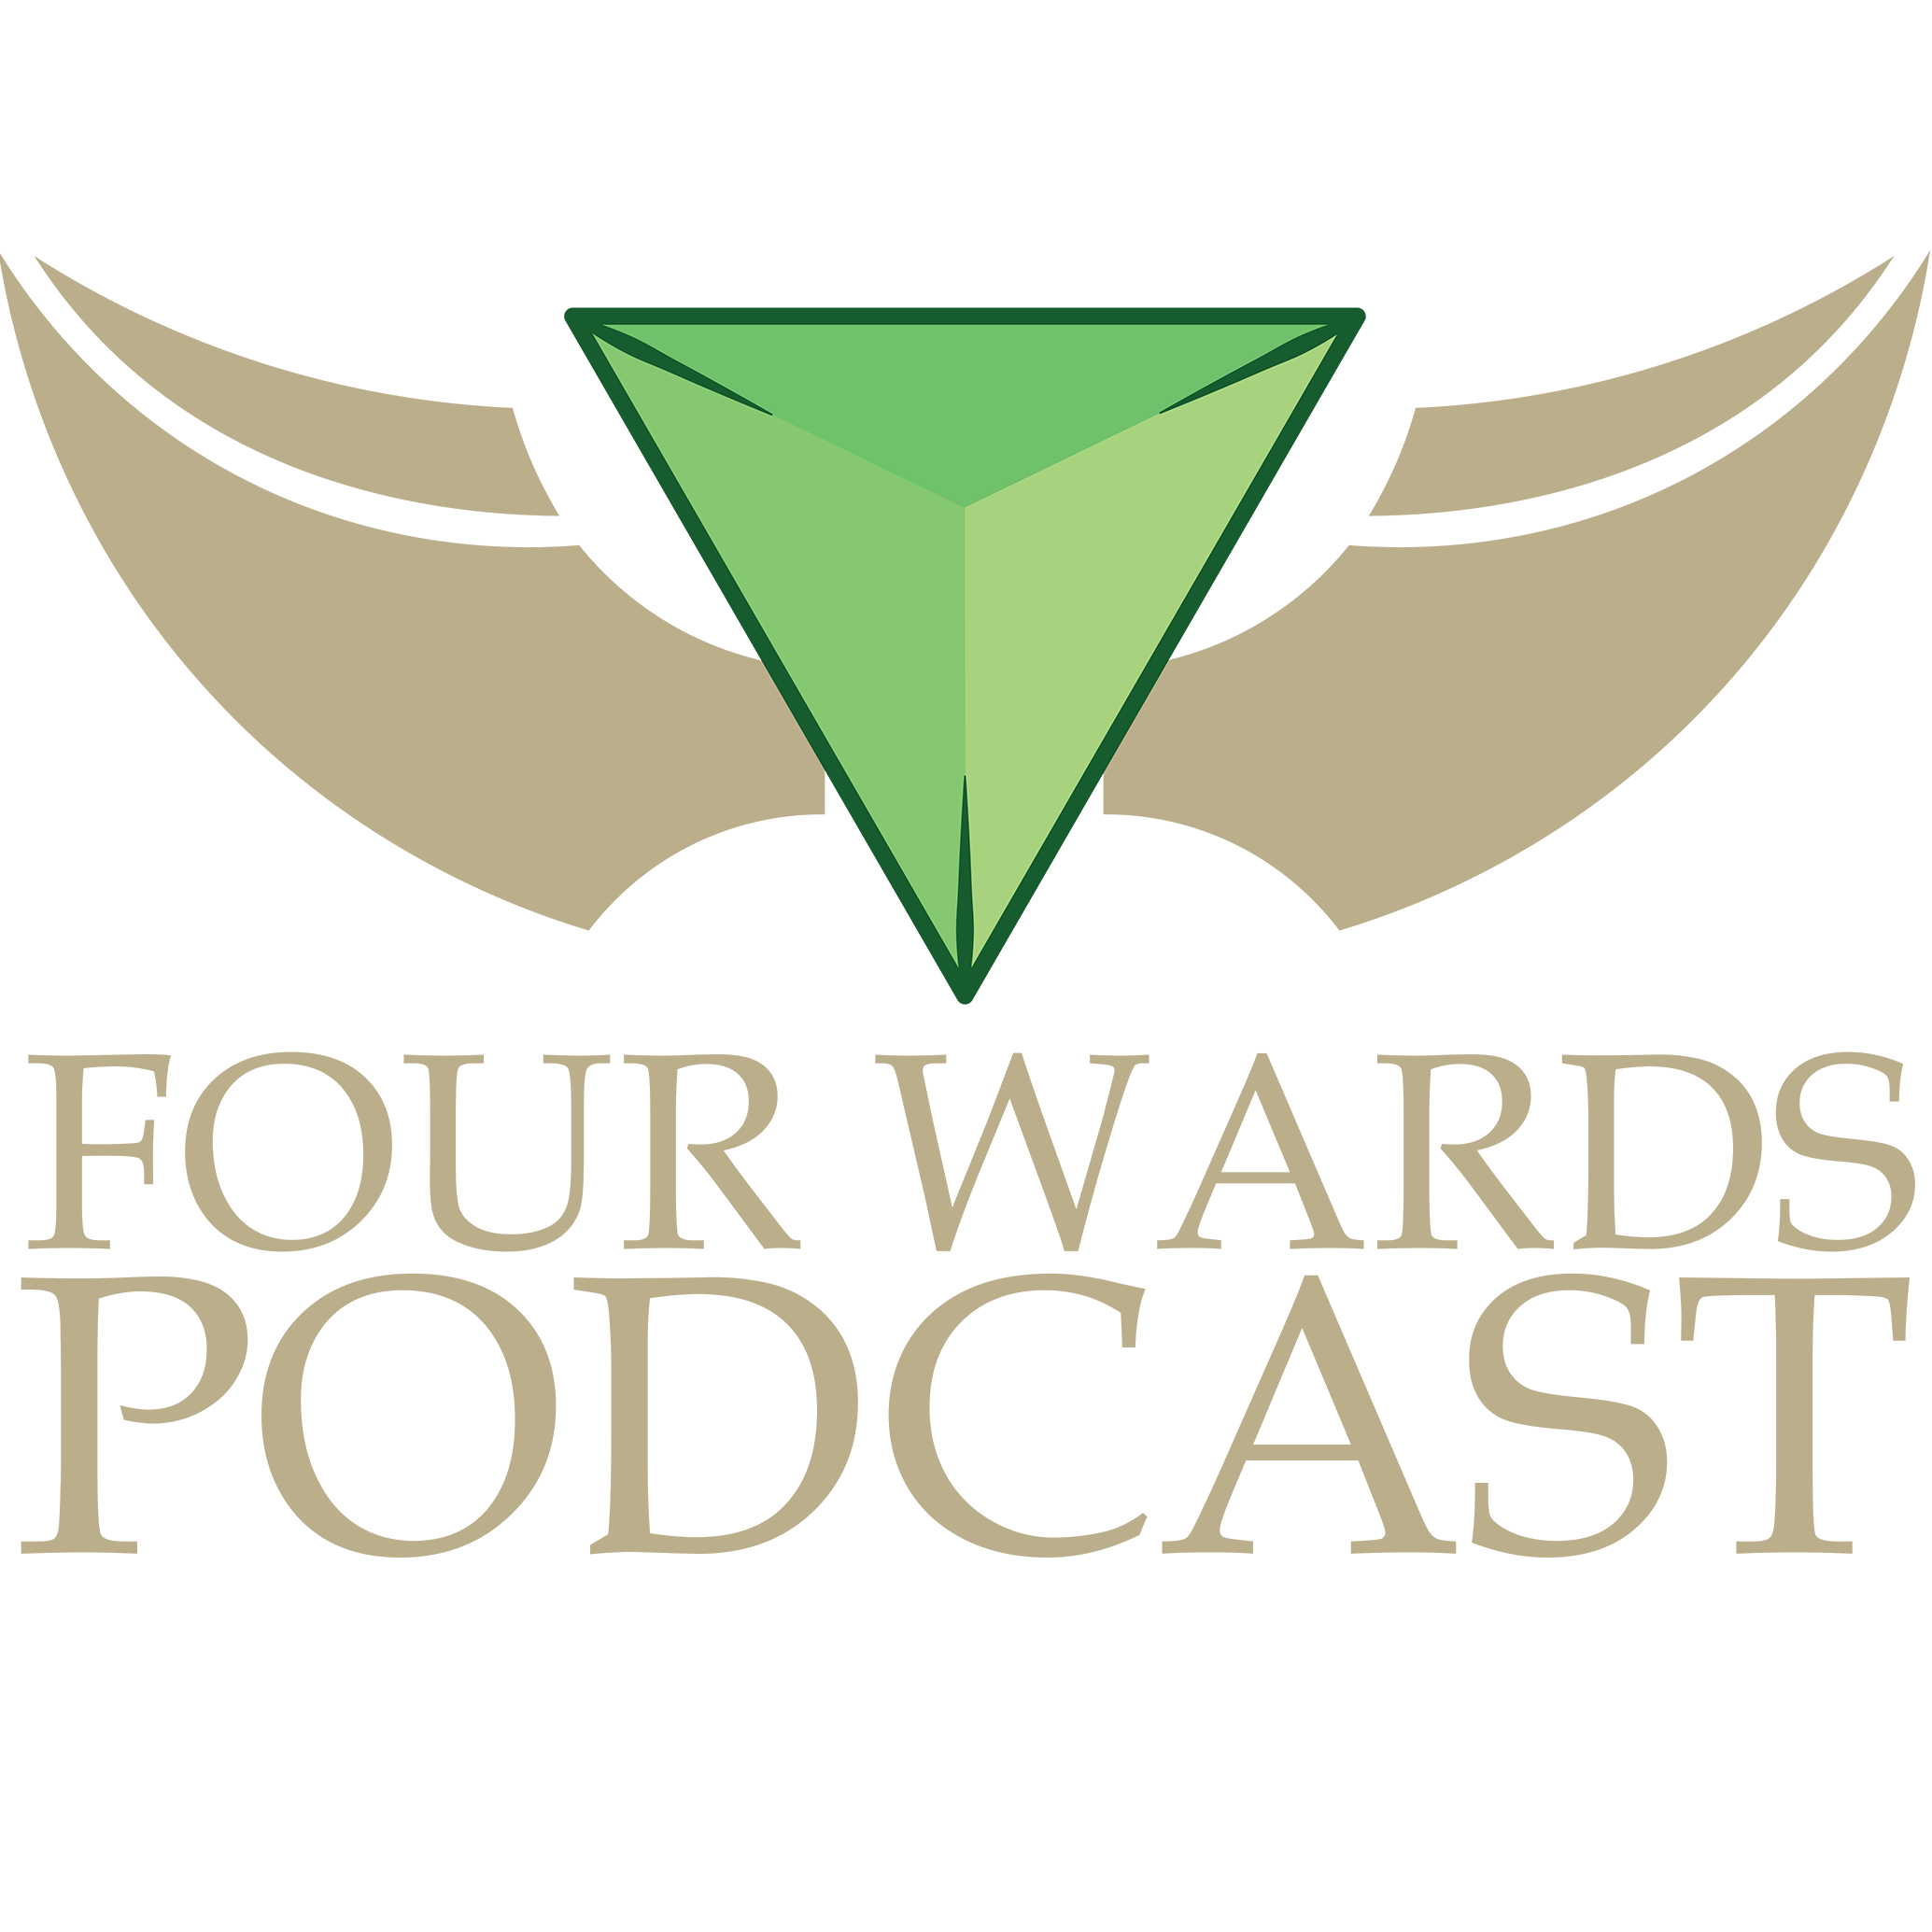 The Four Wards Podcast - Episode 427: Do not quote the old lore to me, I was there when it was written